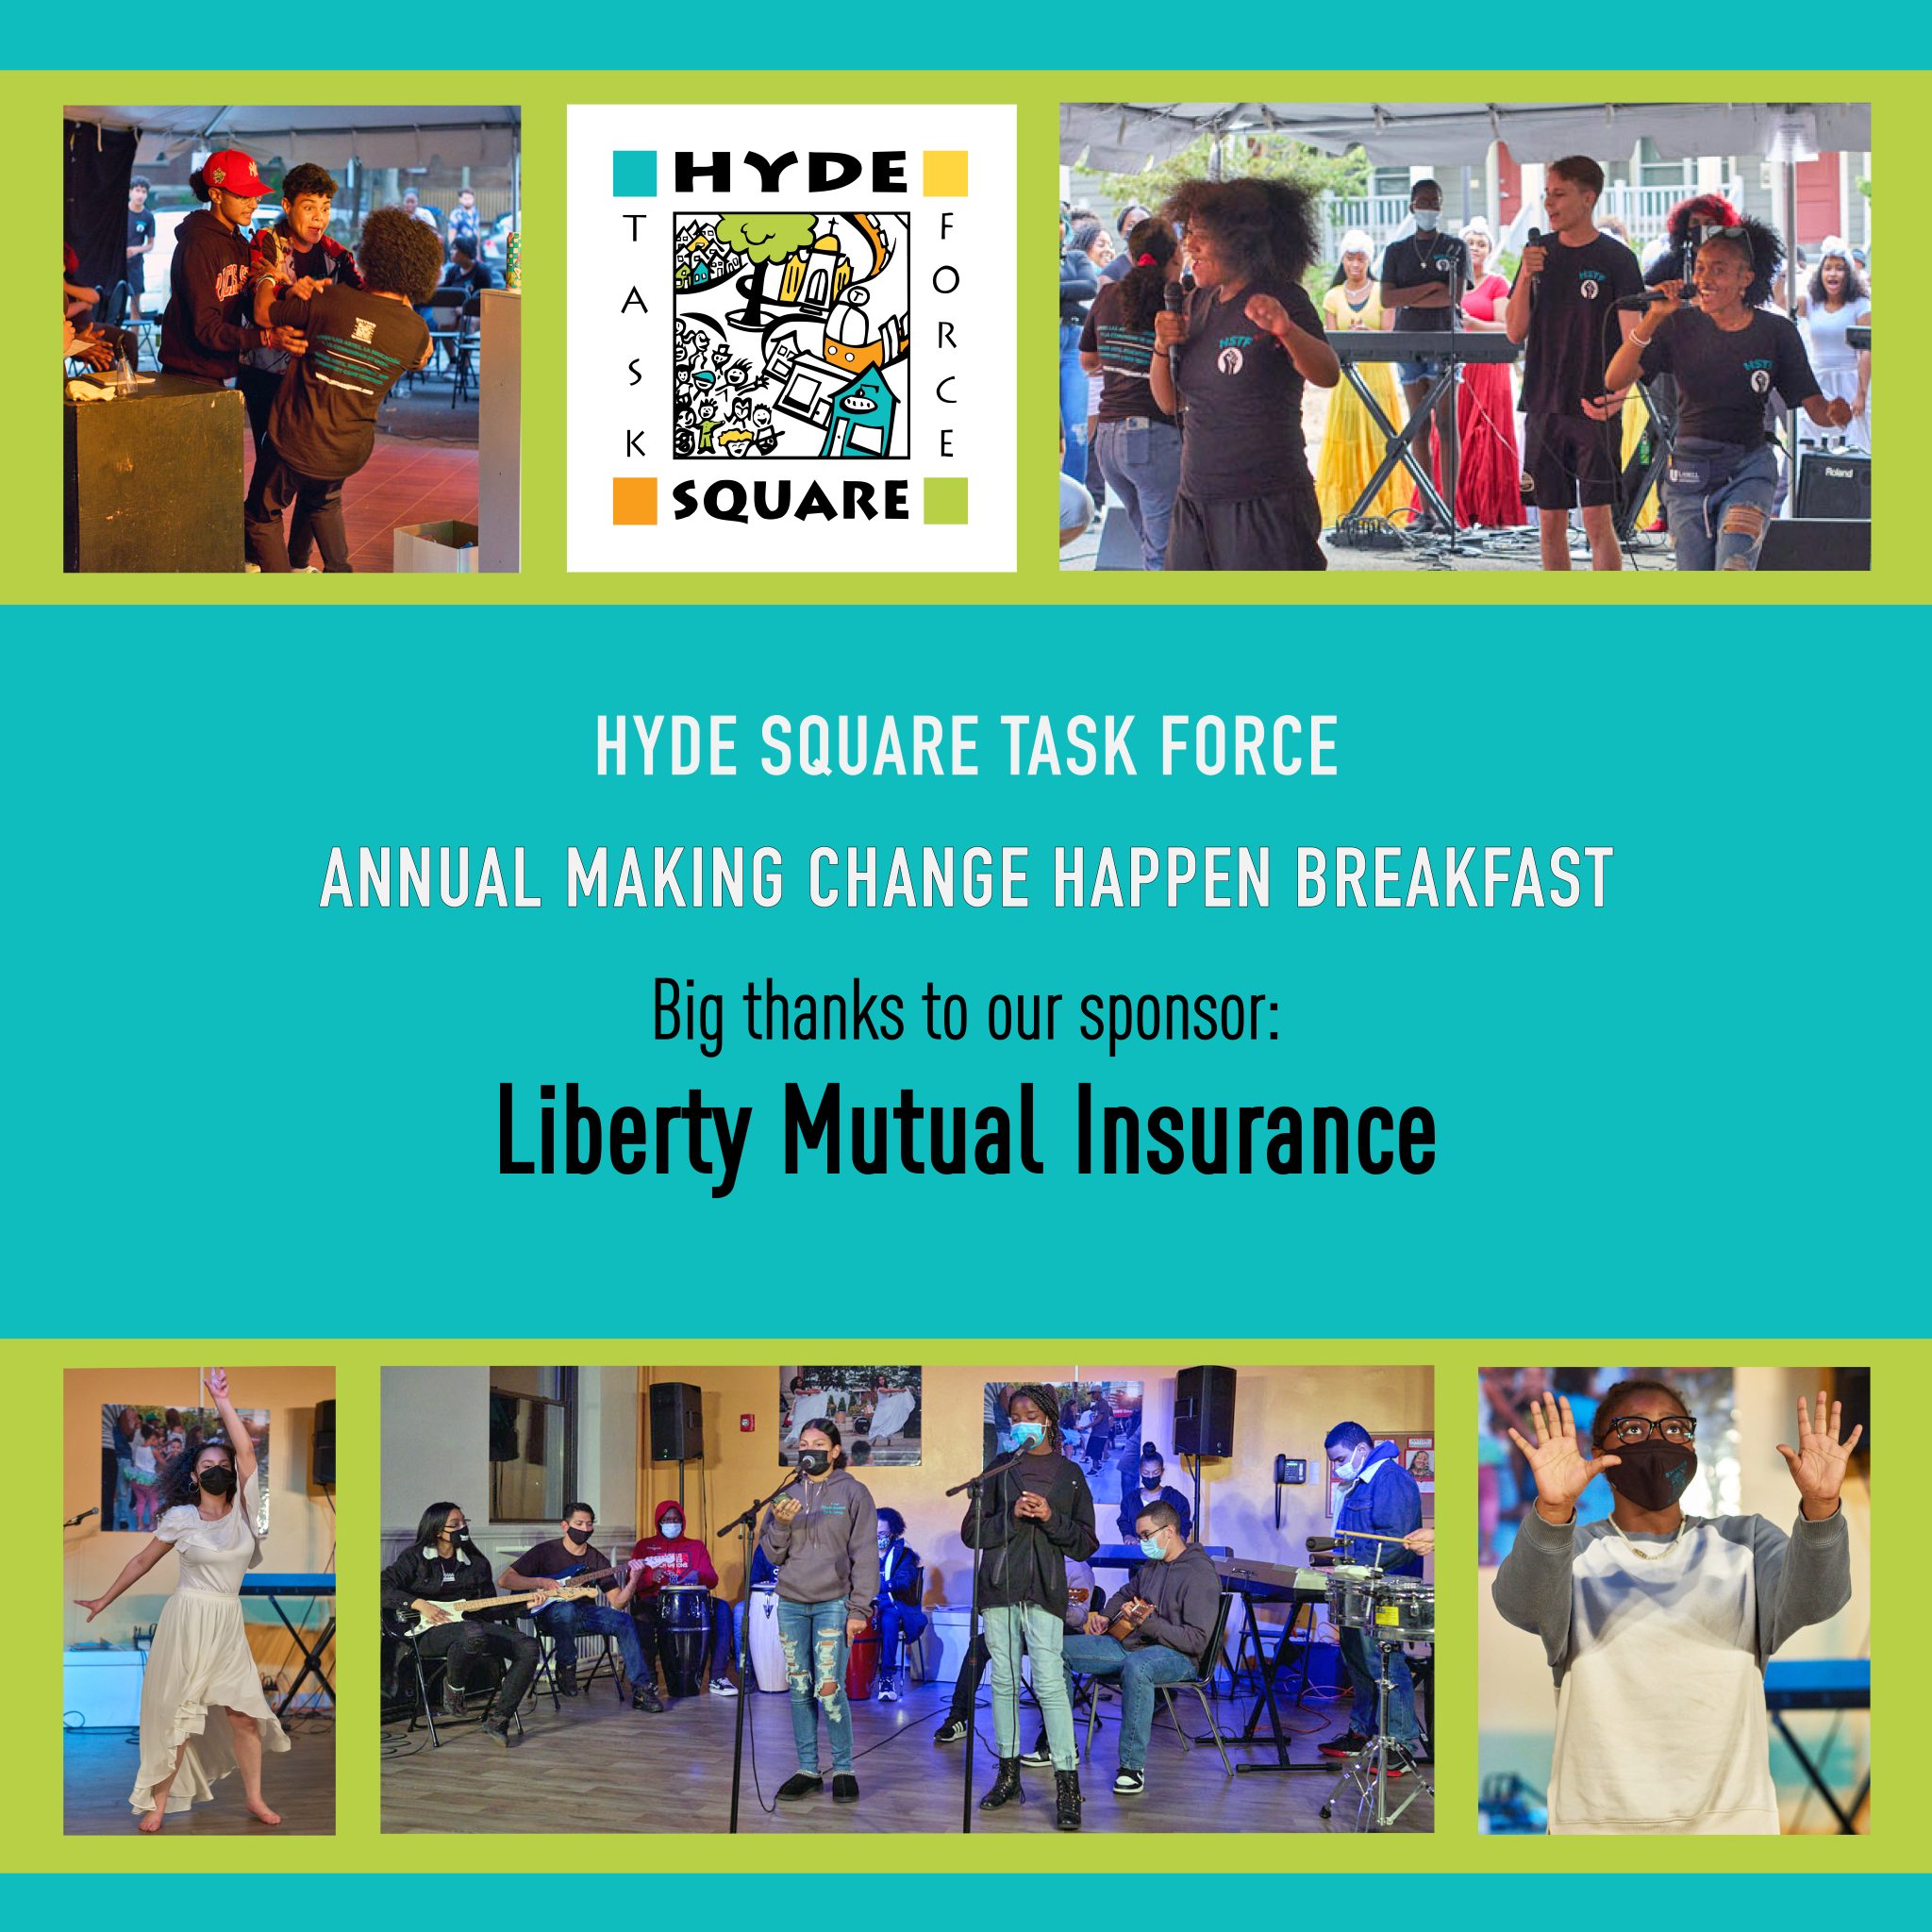 We are less than two weeks away from the Annual Breakfast and today we're giving a huge shout-out to Liberty Mutual Insurance for their support! They received our Corporate Leader Award in 2018 and for good reason. We are so grateful for all that they've done for HSTF and for our communities over the years. Thank you Liberty Mutual Insurance!